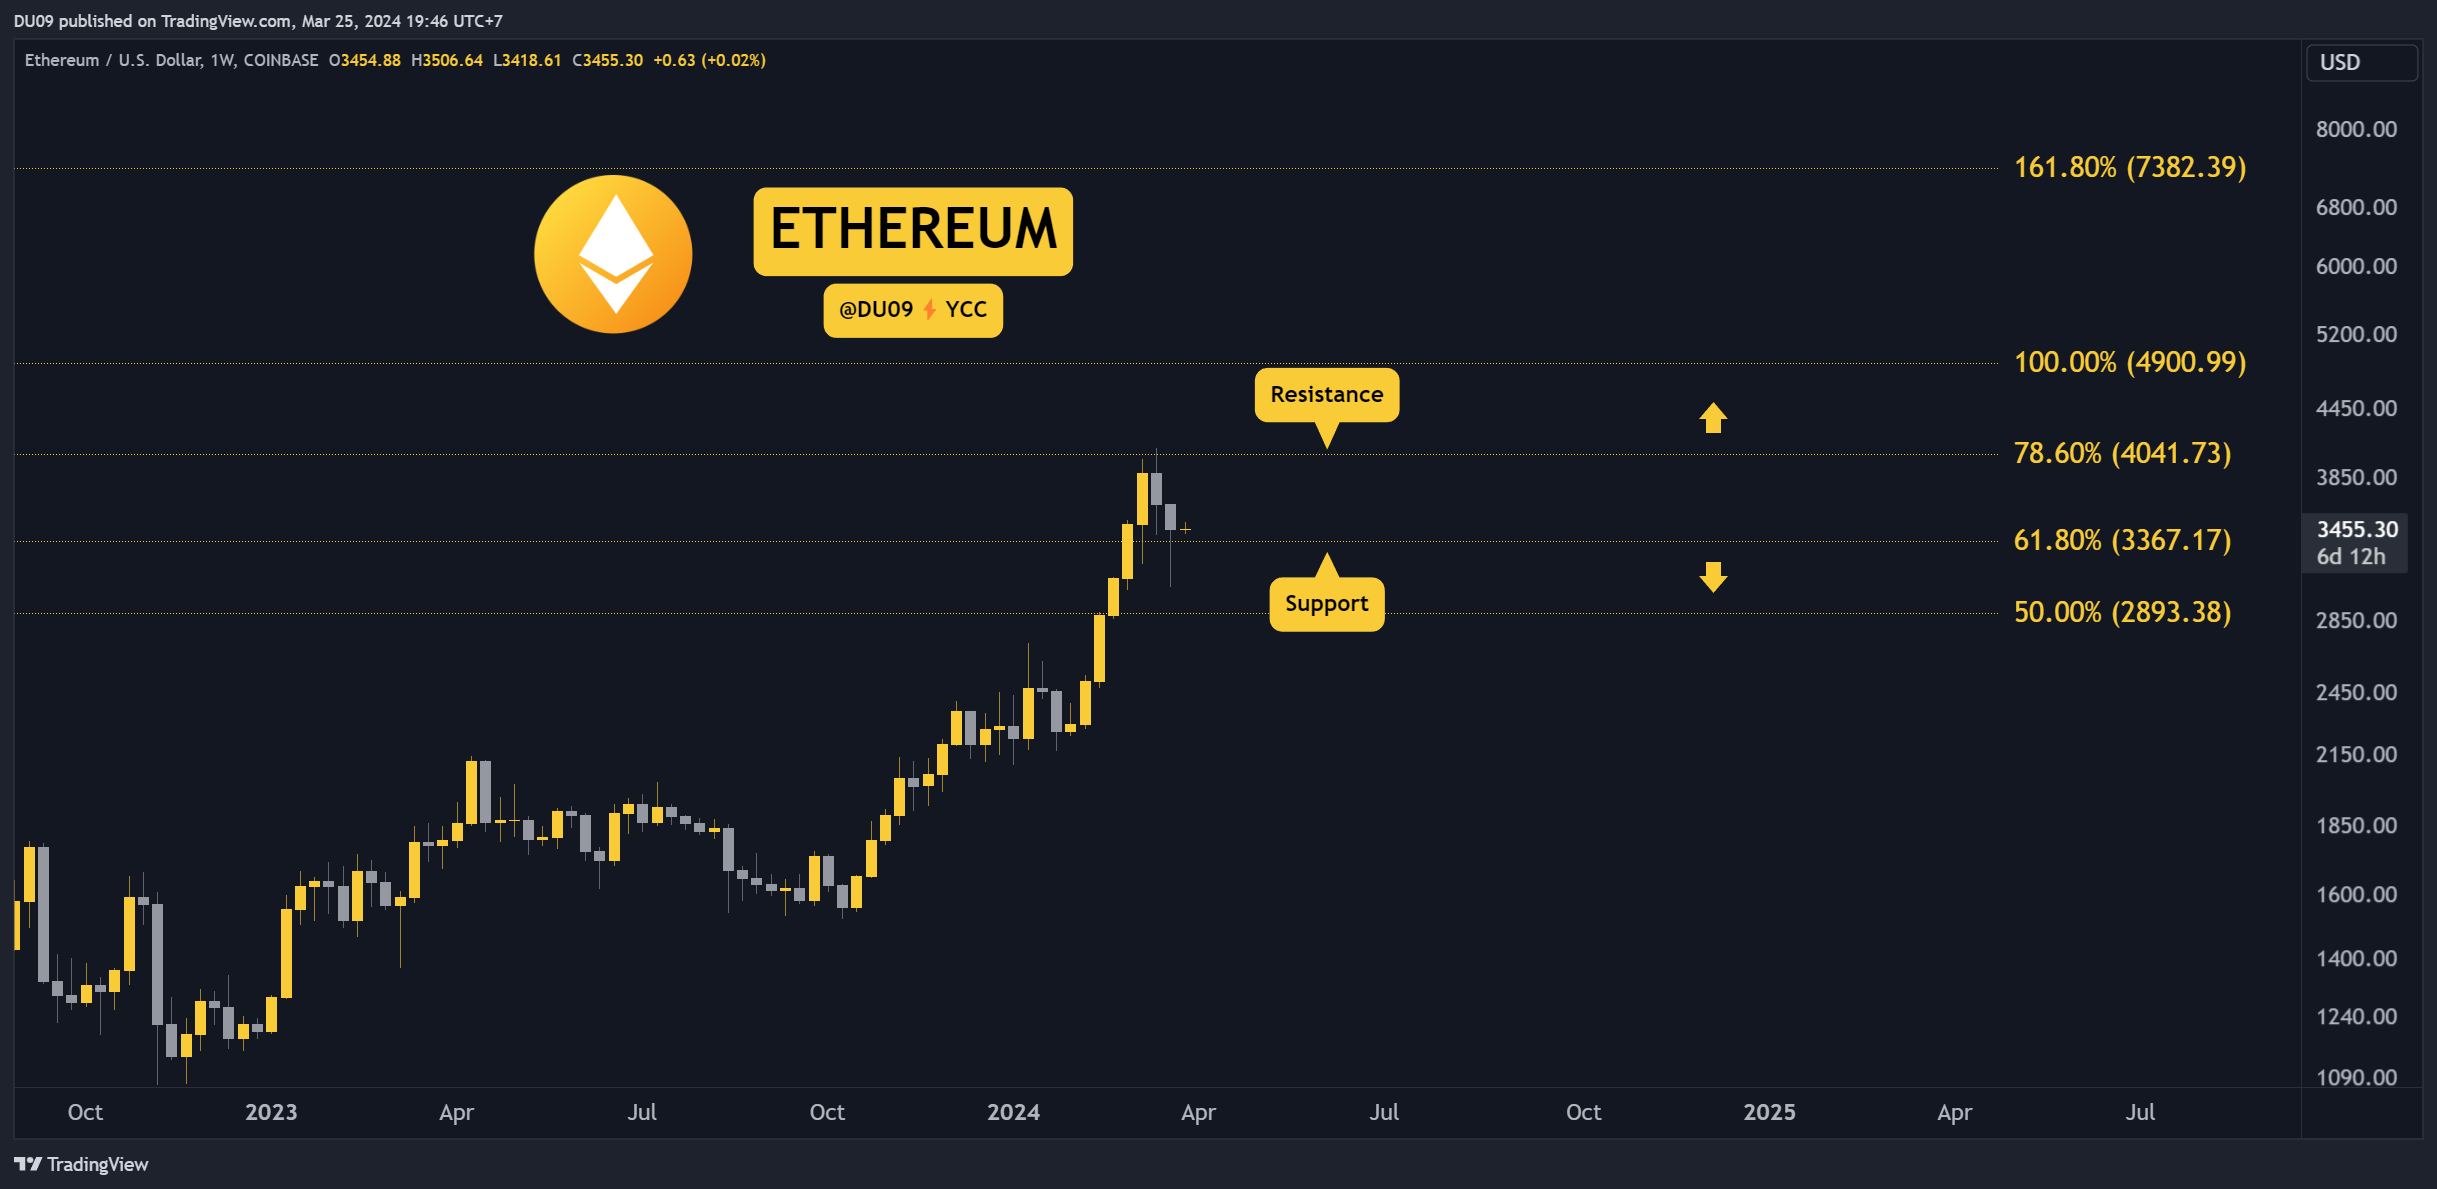 Why is the Ethereum (ETH) Price Up Today?